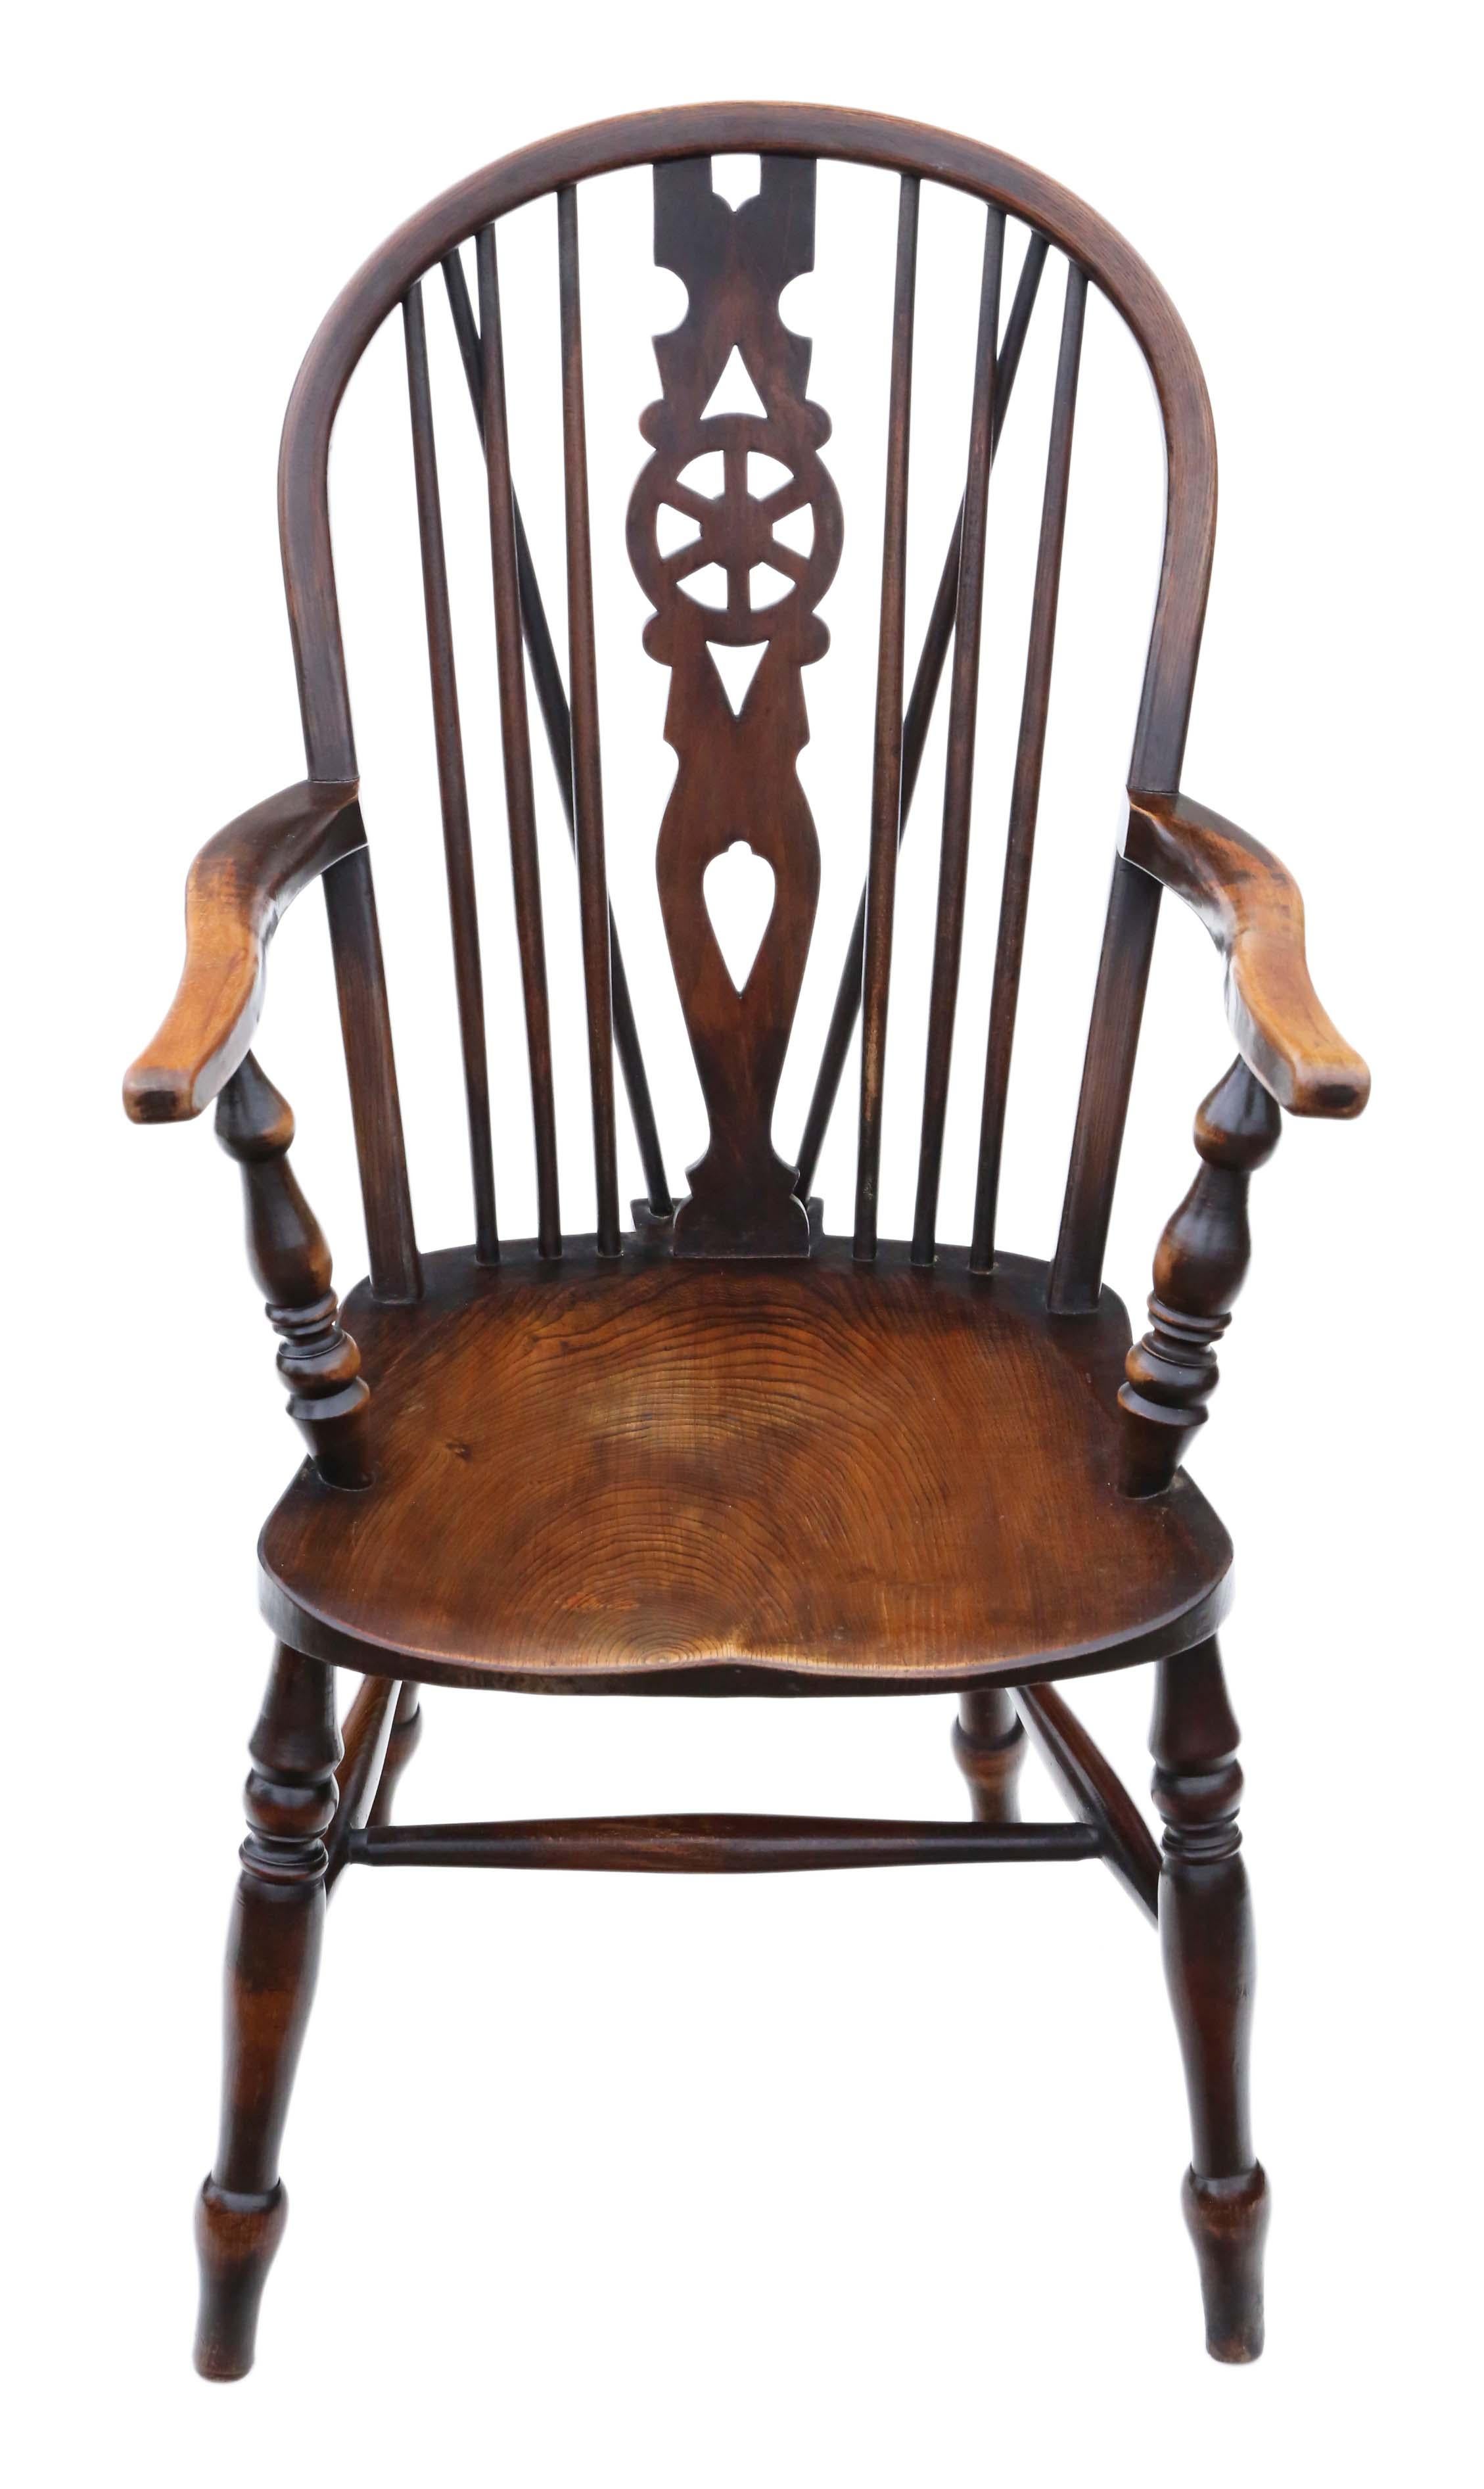 Antique Victorian C1900 ash, beech and elm Windsor chair wheel back dining armchair.

Solid and strong, with no loose joints and no woodworm. Full of age, character and charm. Recently restored to a very good standard.

Would look great in the